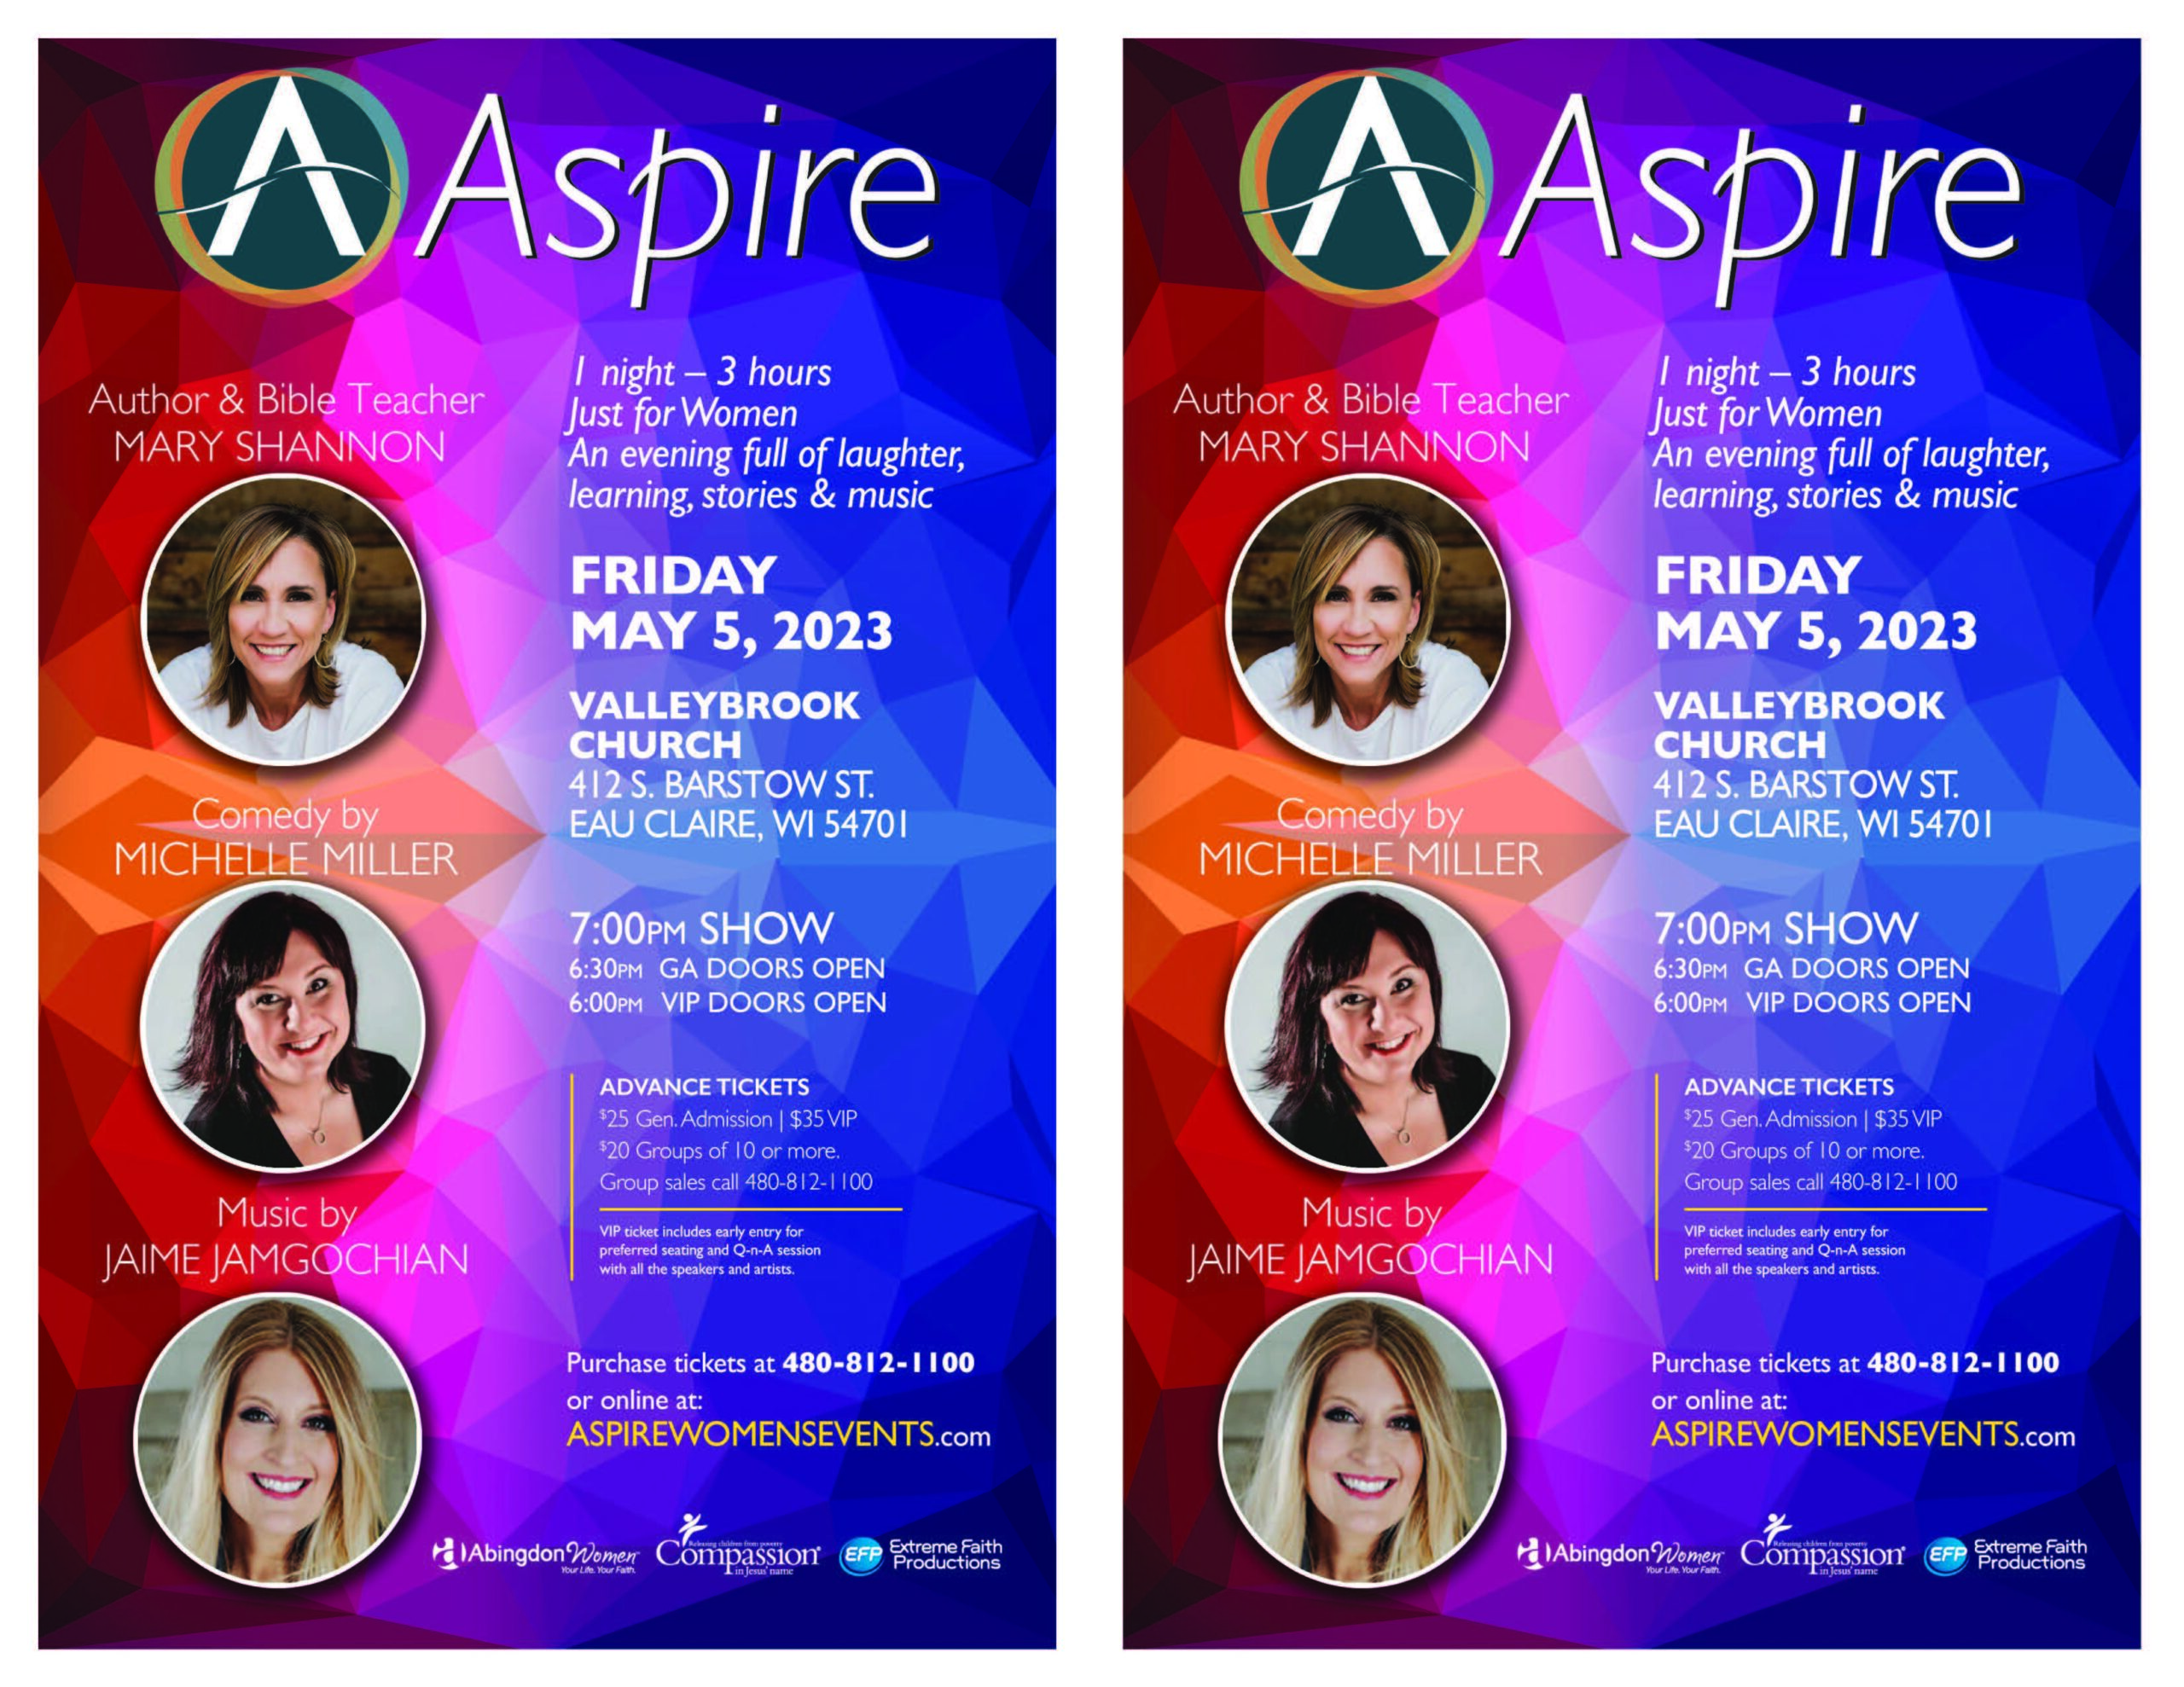 ASPIRE FRI May 5 Eau Claire-2UP